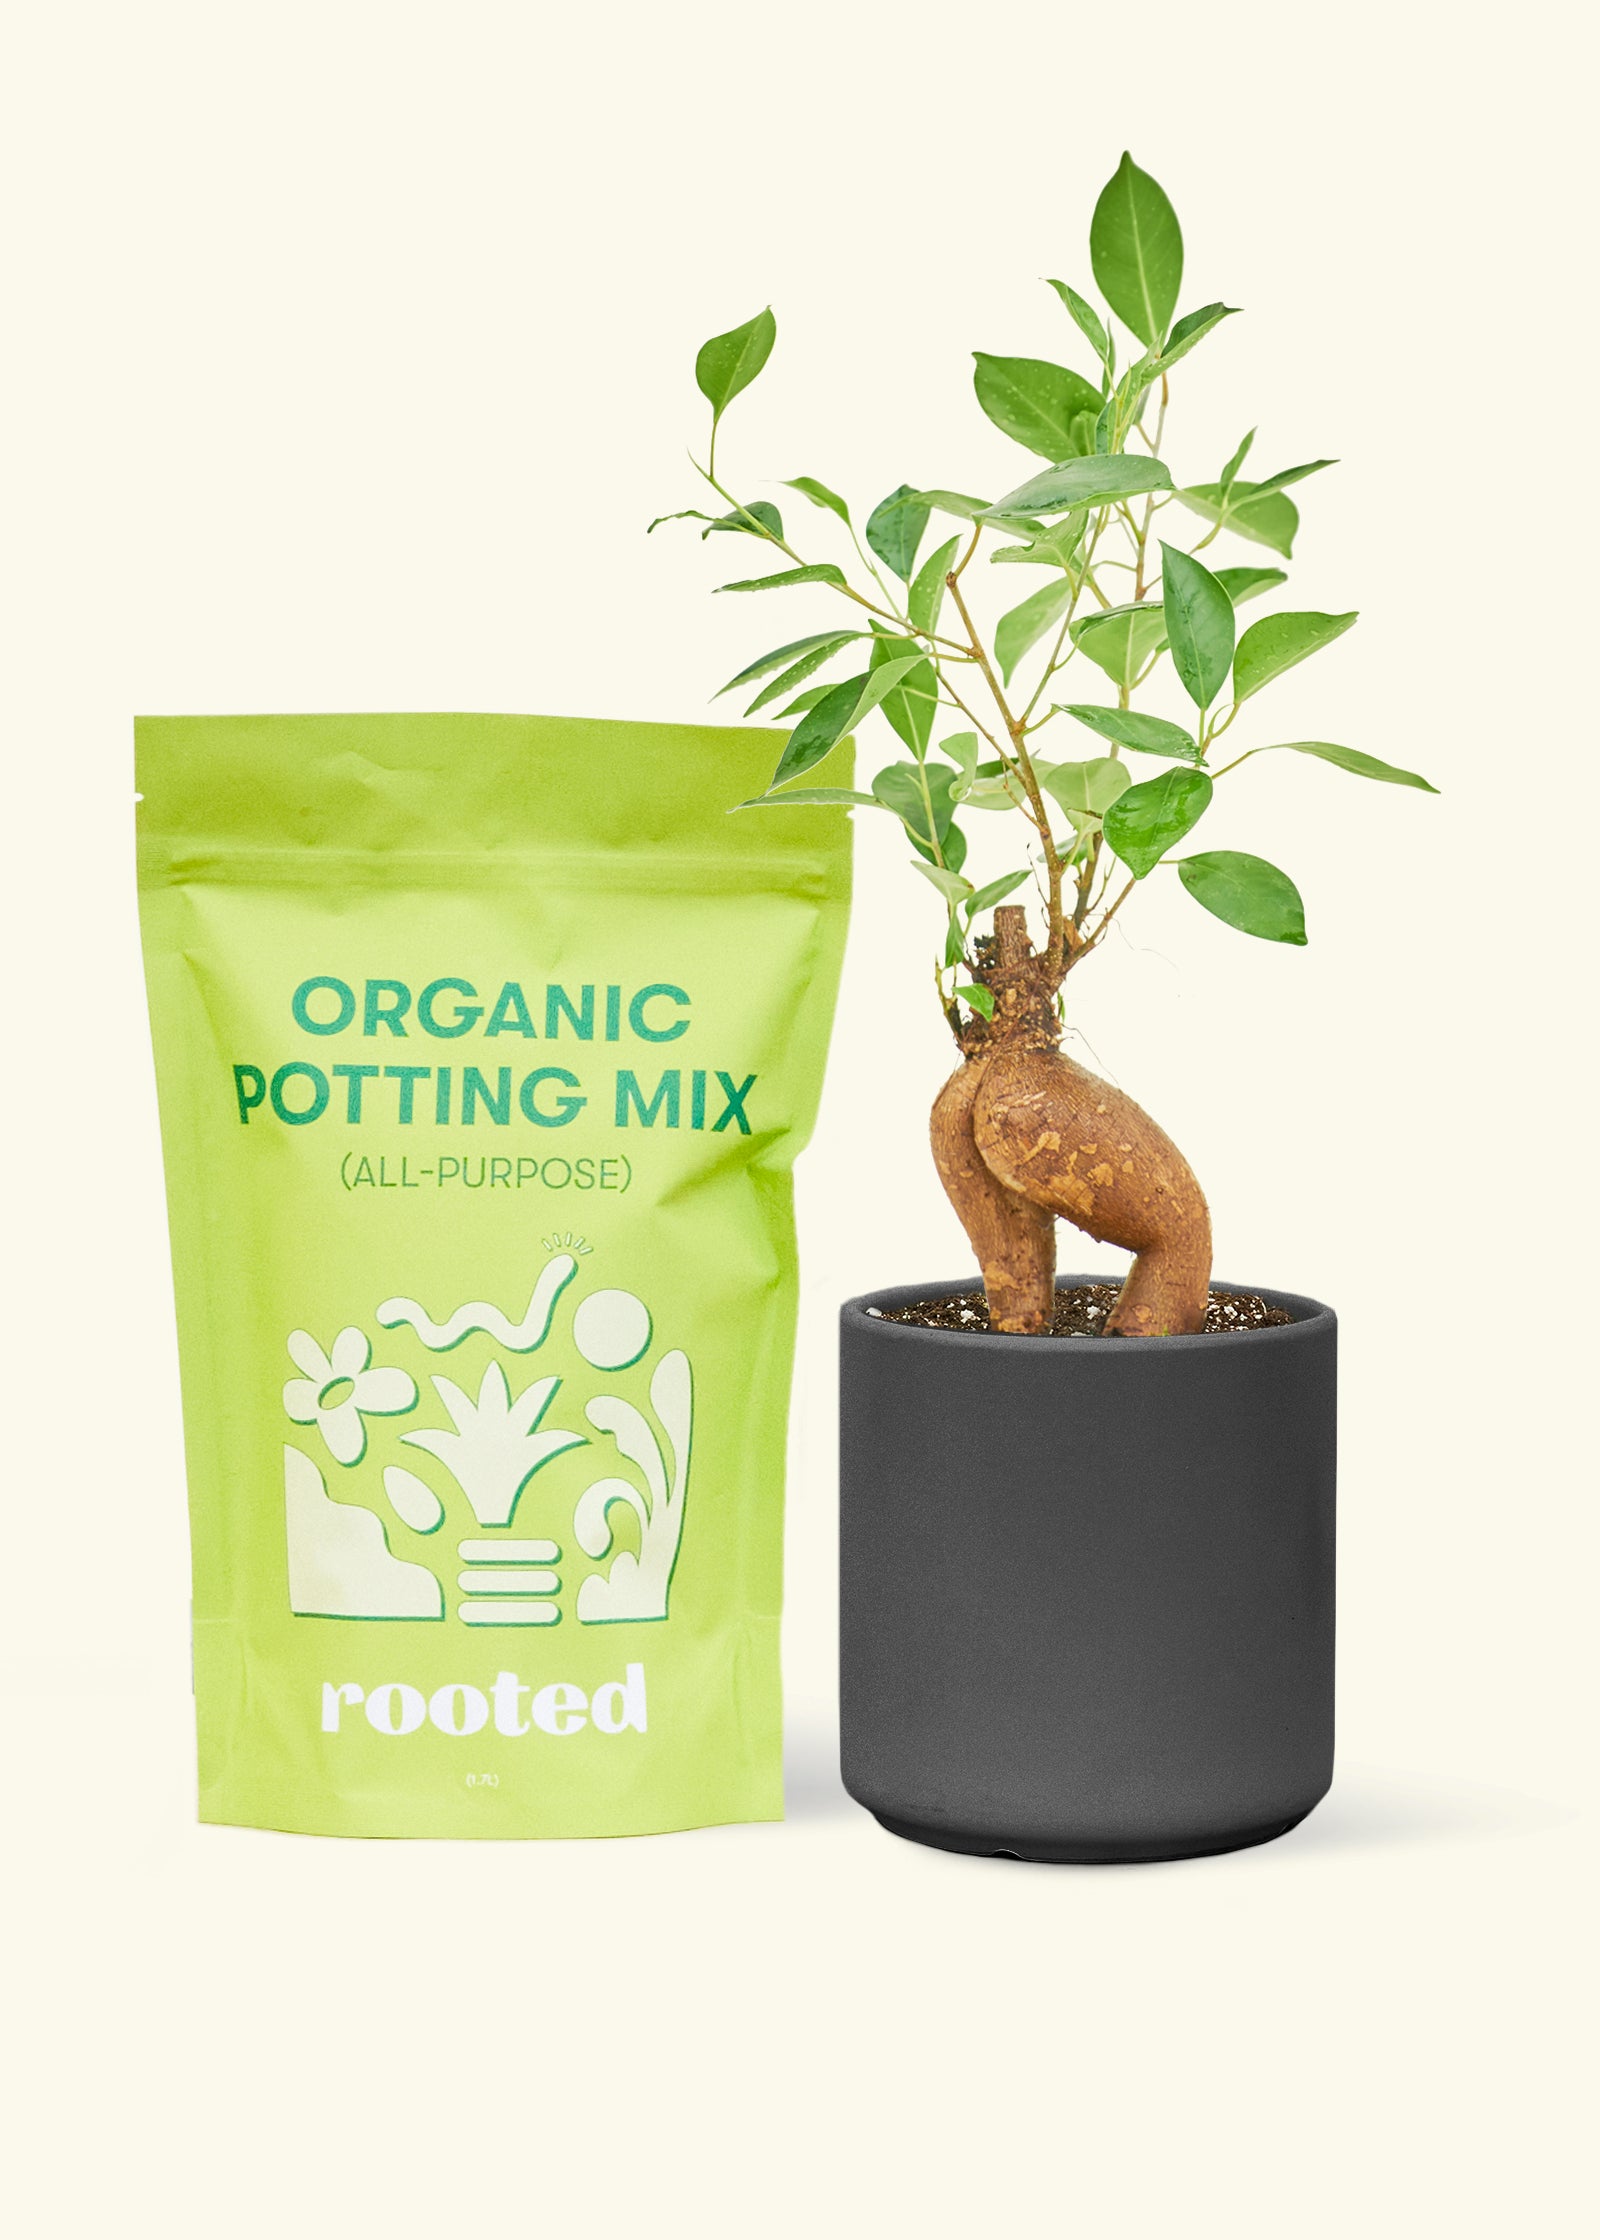 A bag of Organic Potting Mix to the left of a Ficus 'Ginseng' in a black cylinder ceramic pot.